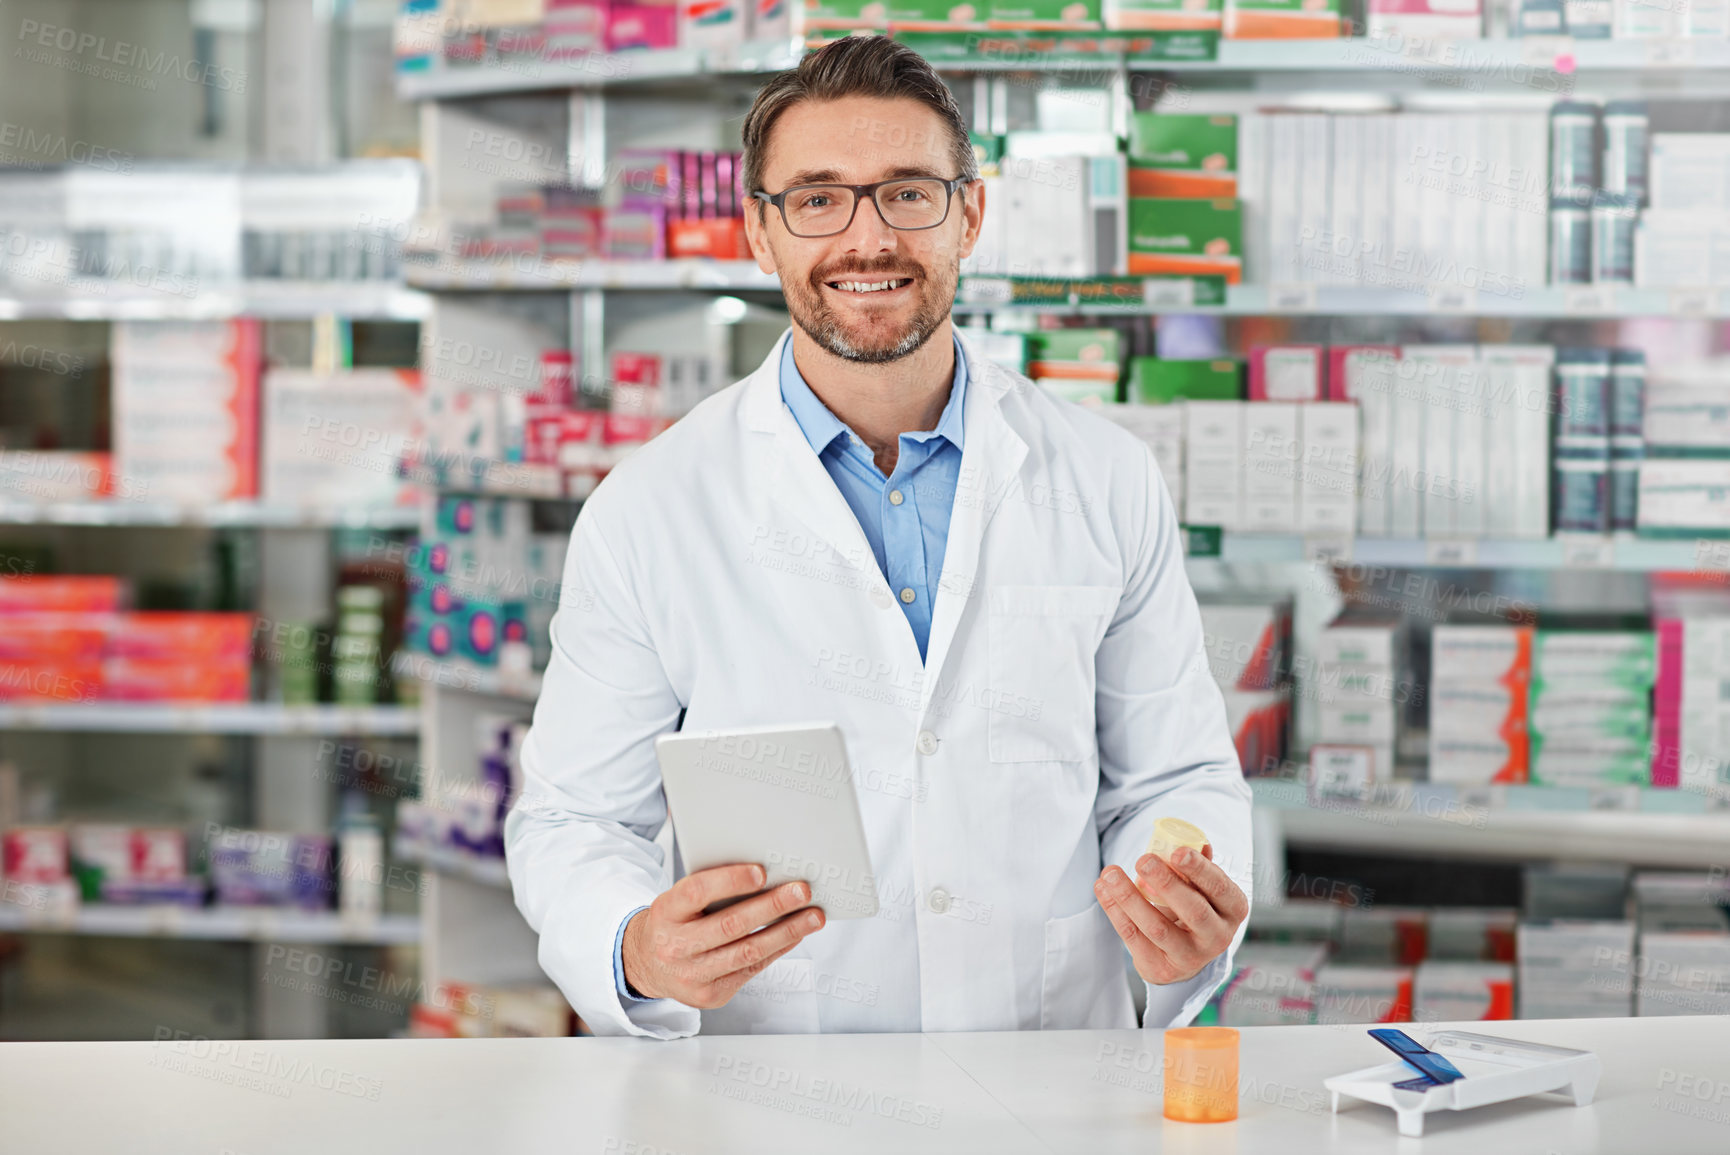 Buy stock photo Portrait, tablet and healthcare with a pharmacist man at work in a pharmacy for pharmaceutical medication. Medicine, trust and pills with a male working in a medical dispensary for treatment or cure